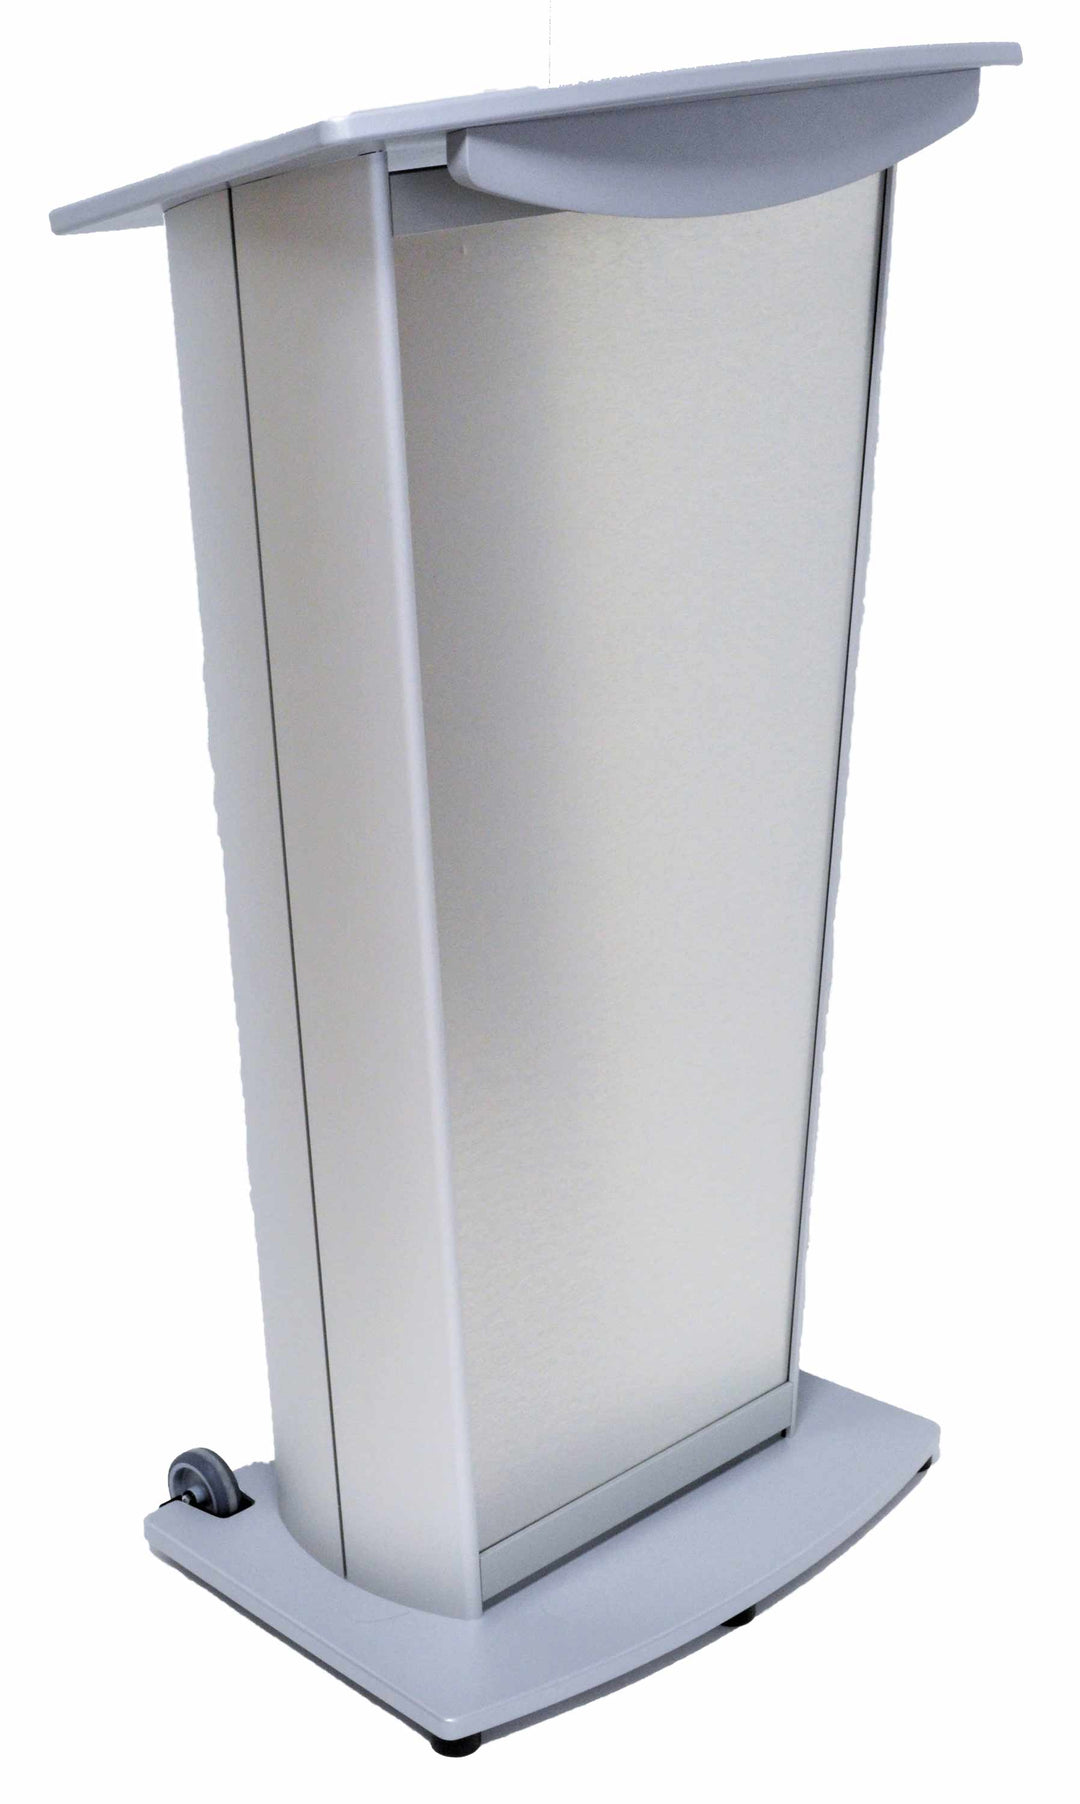 Contemporary Lecterns and Podium VH1 Standard Aluminum Lectern-Angle-Contemporary Lecterns and Podiums-Podiums Direct